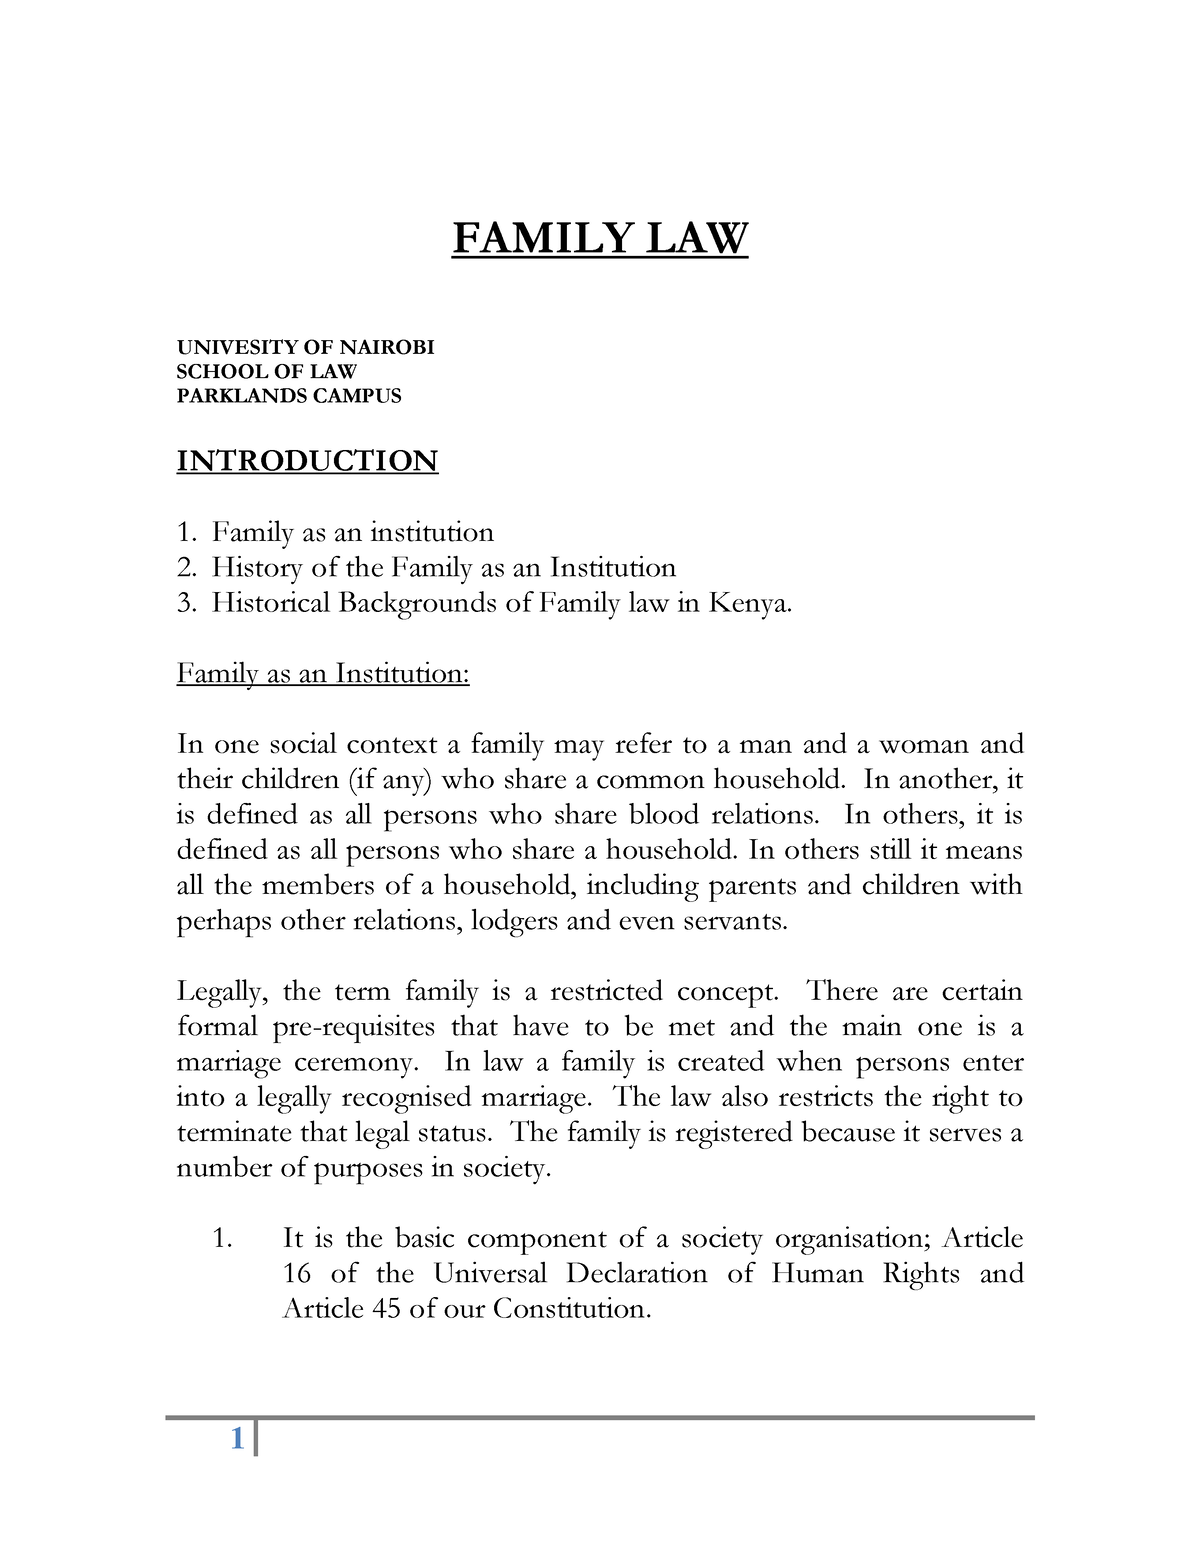 dissertation topics in family law